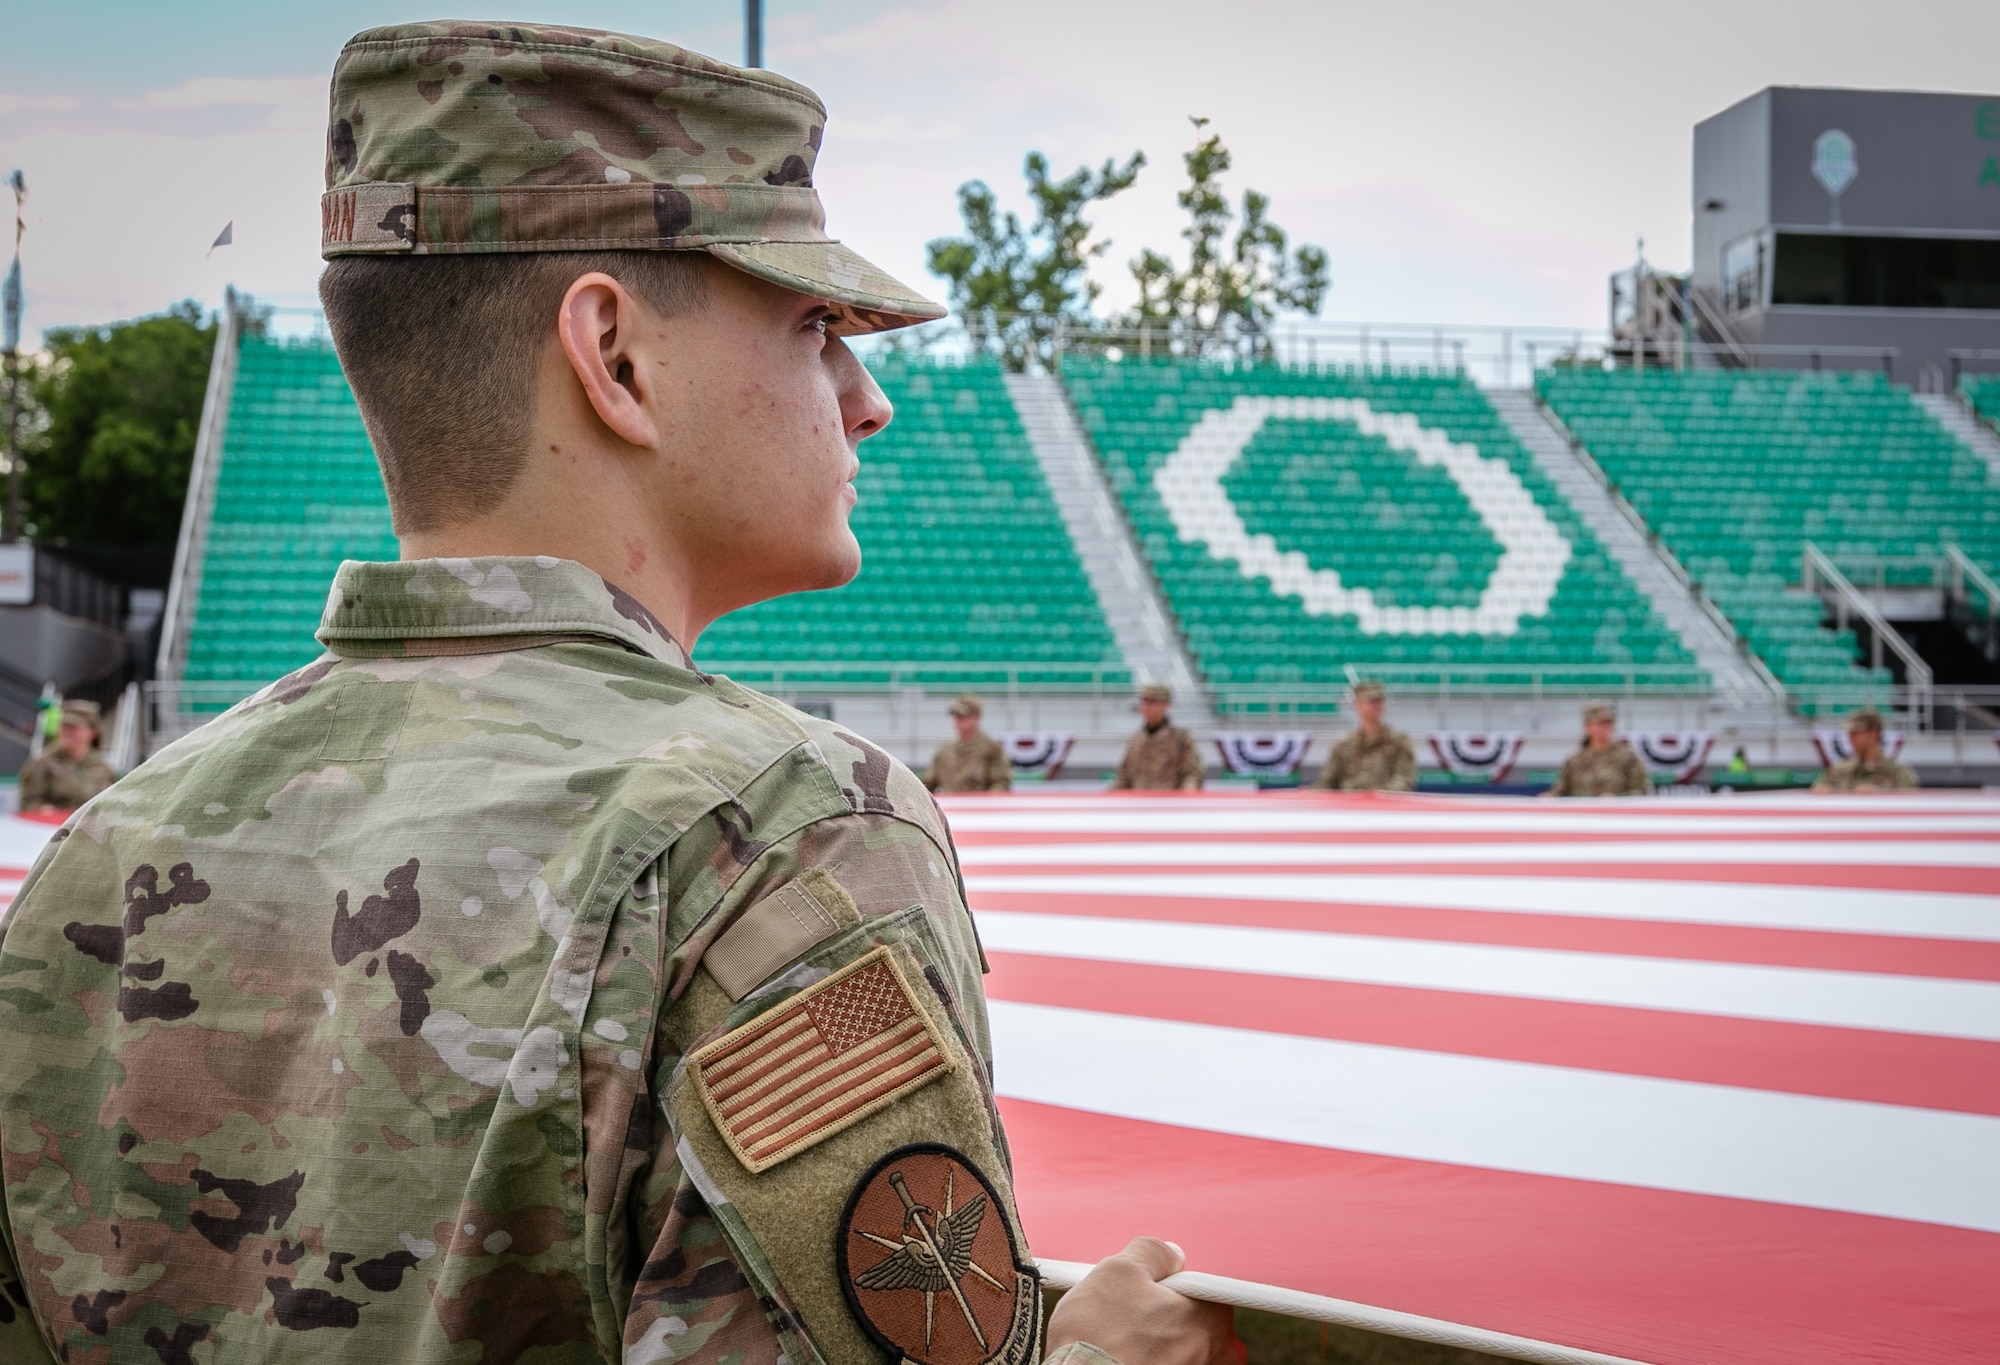 Airman holds section of large U.S. flag at stadium.